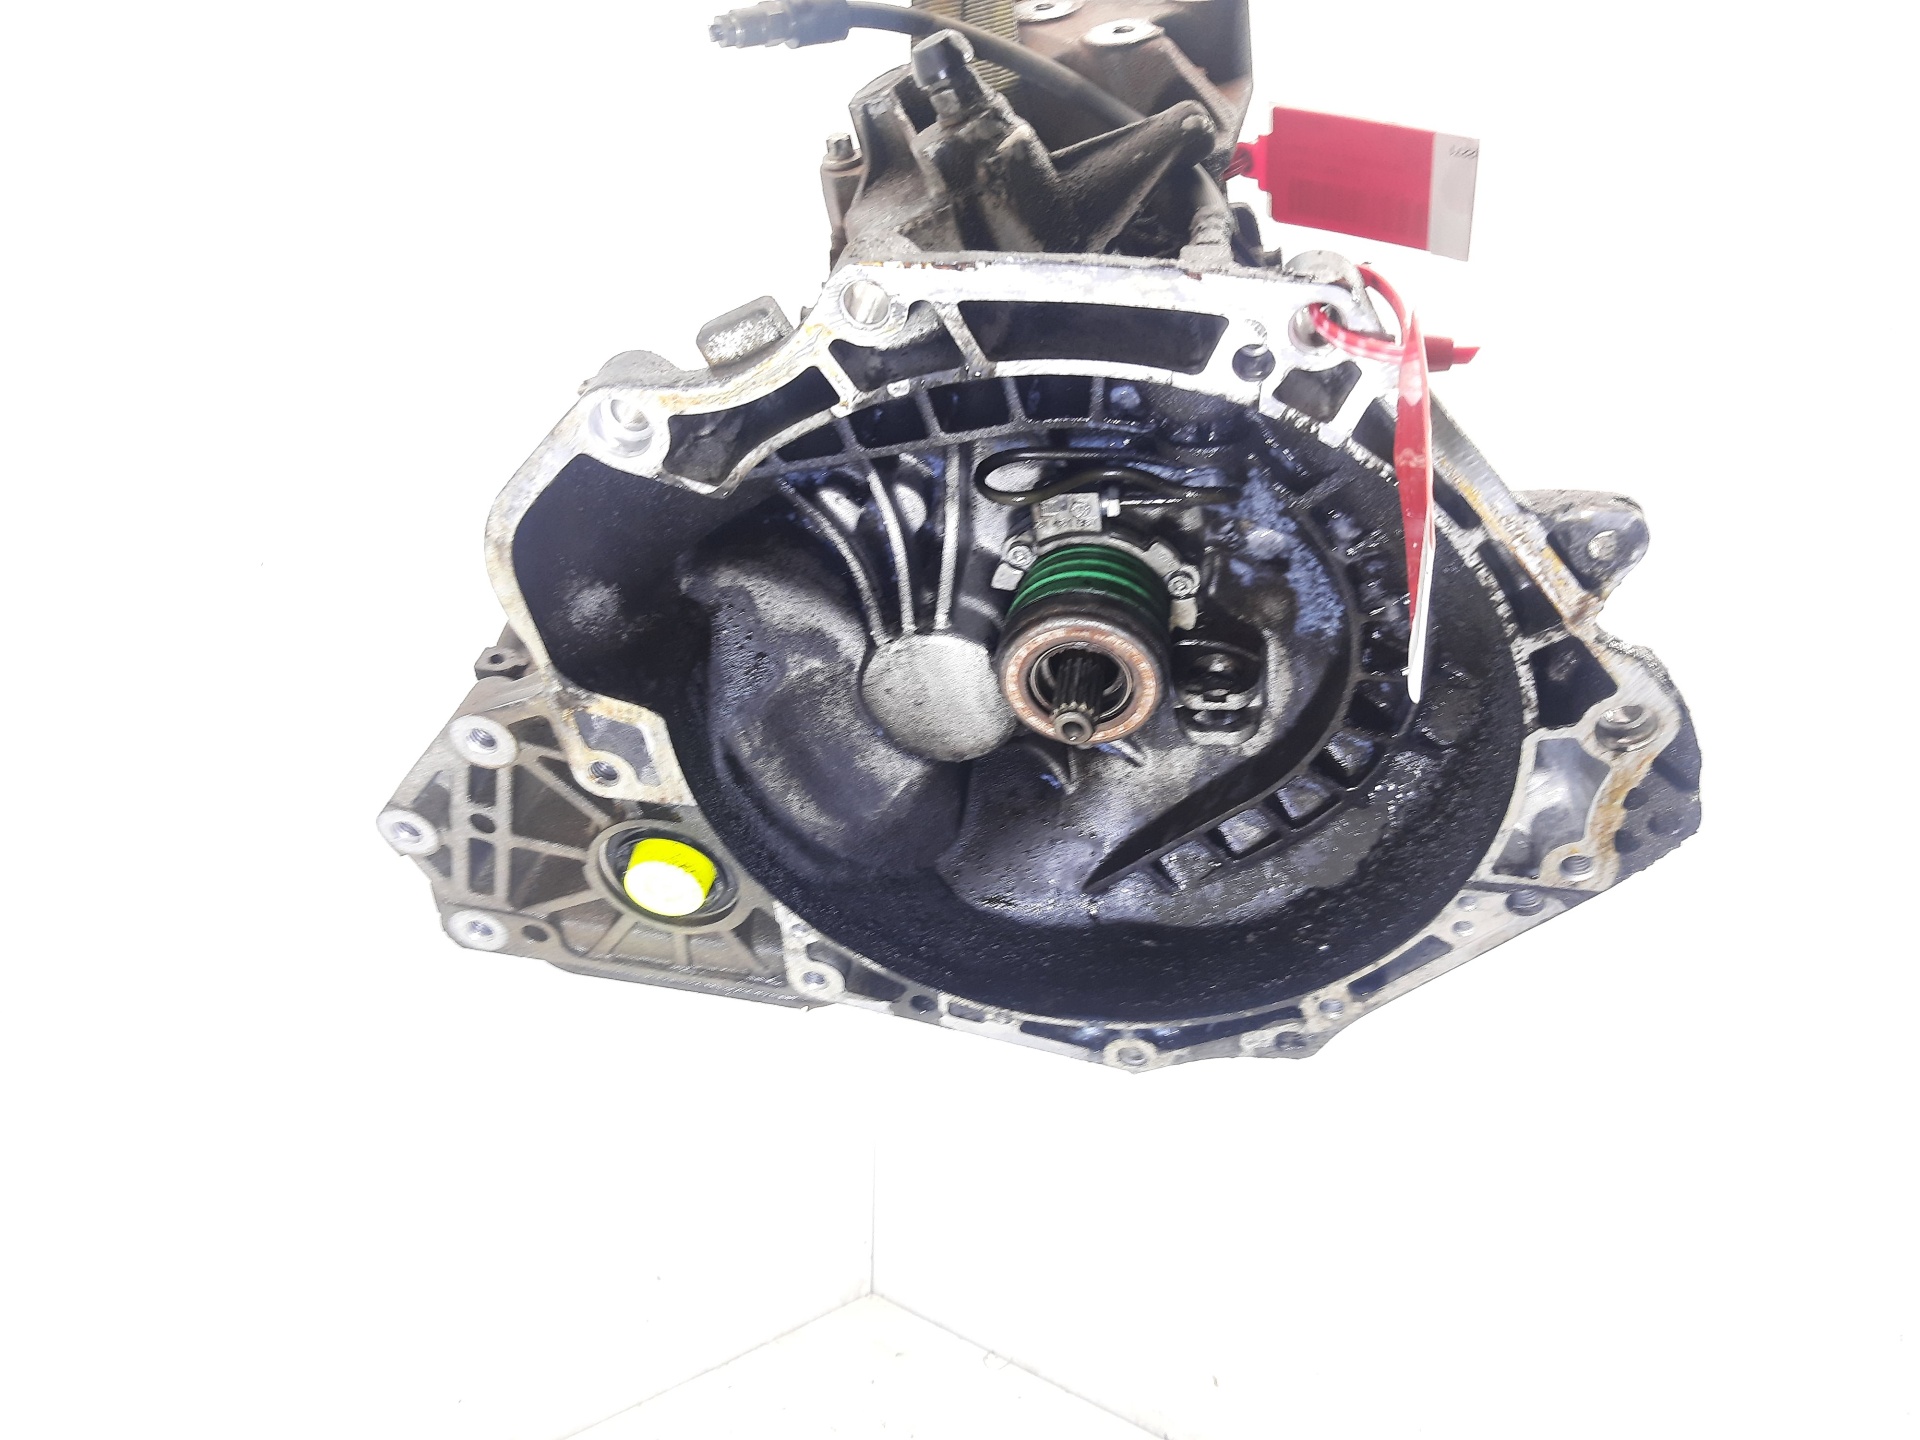 OPEL Astra H (2004-2014) Gearbox Z16SE, 5VELOCIDADES 24142585